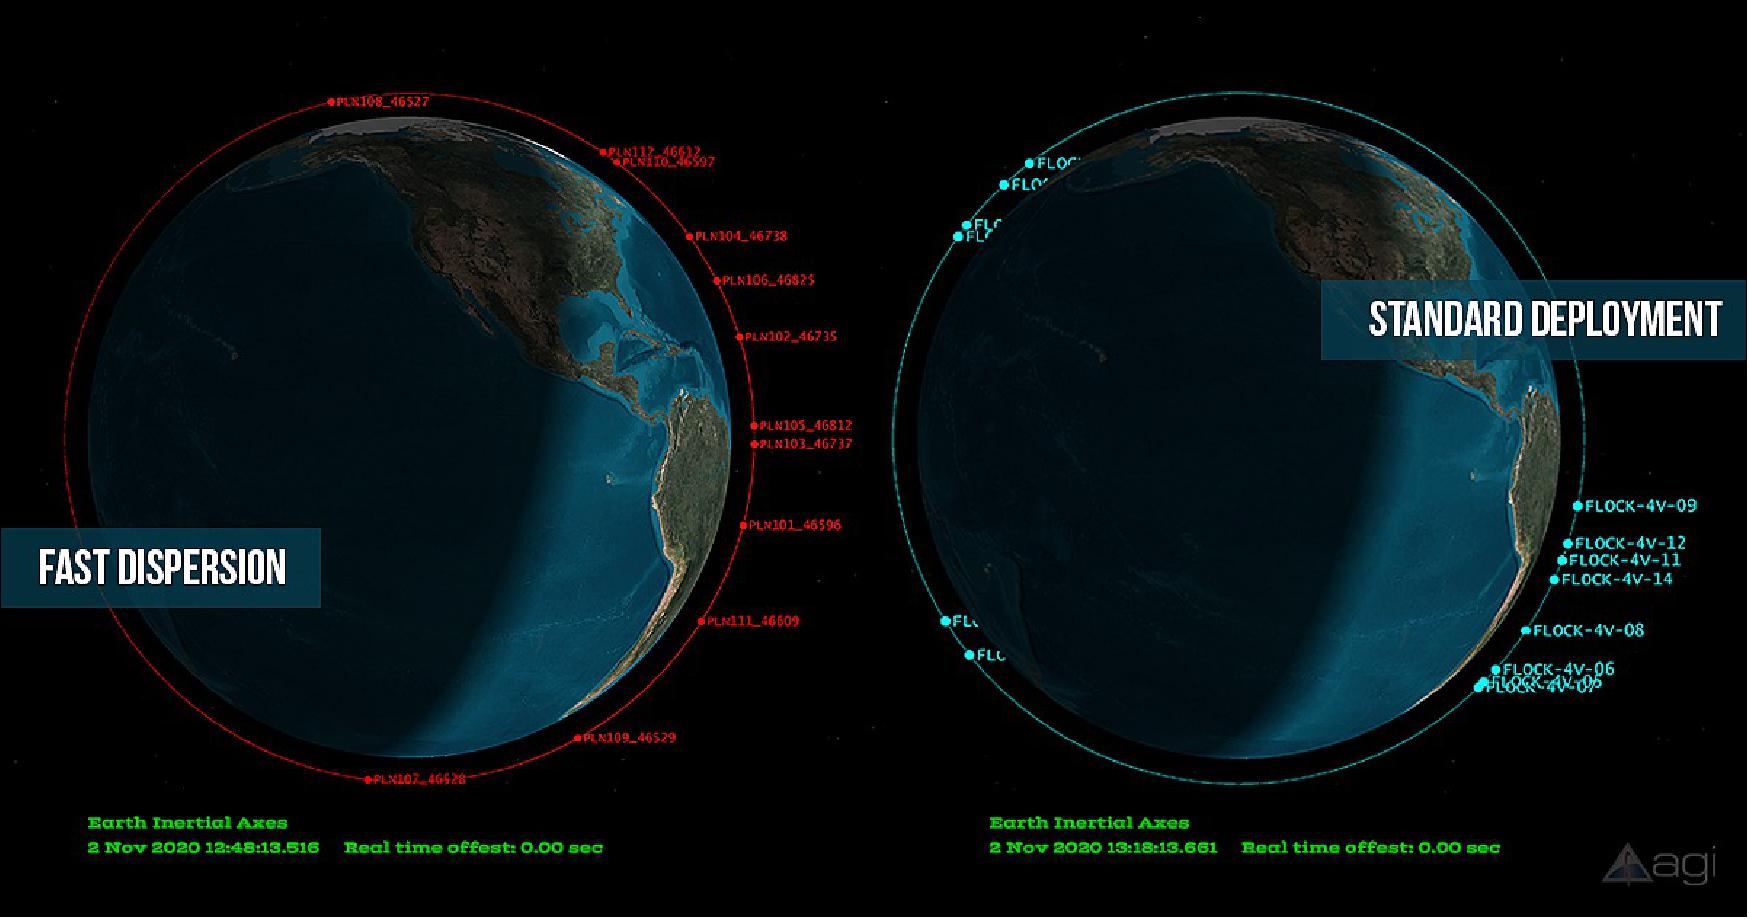 Figure 9: Pictured here, the phasing of the 26 Planet's SuperDove satellites hosted onboard the Vega SSMS POC flight, as of November 2nd, 2020: on the right, the 14 SuperDoves released directly from the upper stage of the launch vehicle. The image gives an idea of how the spacecraft are slowly drifting to their final operational positions. - On the left, the 12 SuperDoves released through ION’s Fast Dispersion deployment strategy; these satellites, hosted inside ION Satellite Carrier, were released once every two or three days starting on September 25th. - The picture clearly shows that the Fast Dispersion deployment strategy succeeds in phasing out the satellites in a much shorter time with respect to a standard deployment approach (image credit: D-Orbit)